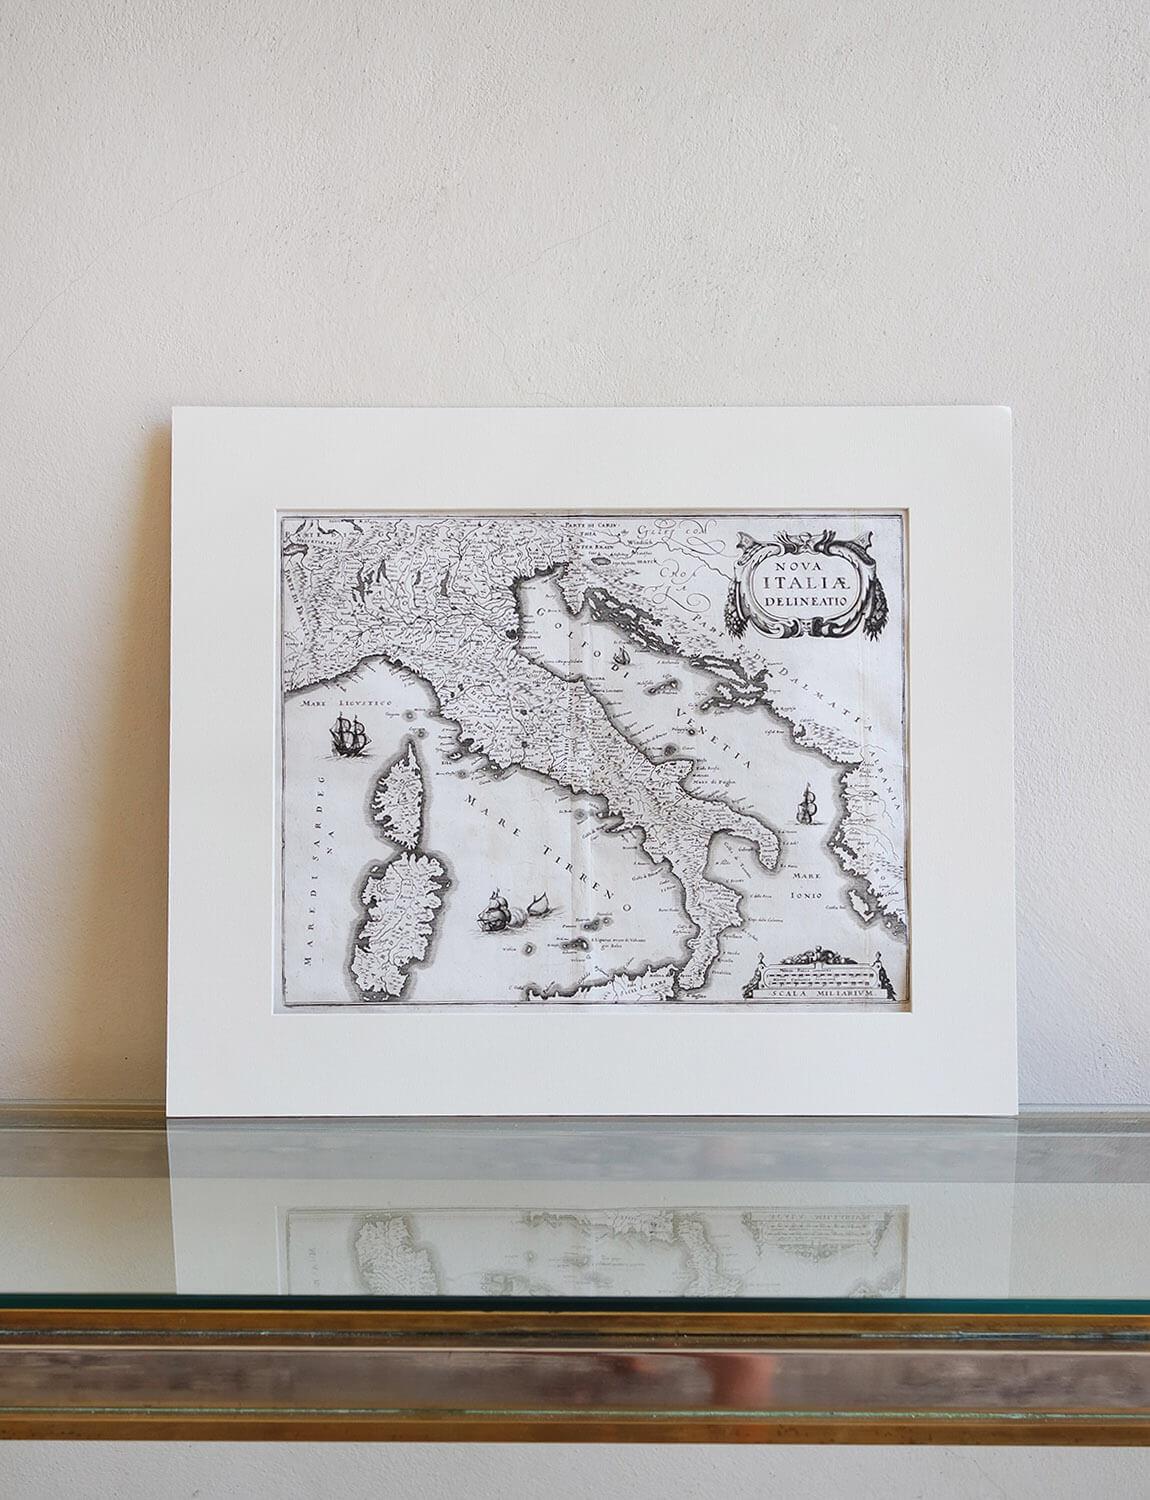 Italian 17th Century Geographical Map of Italy